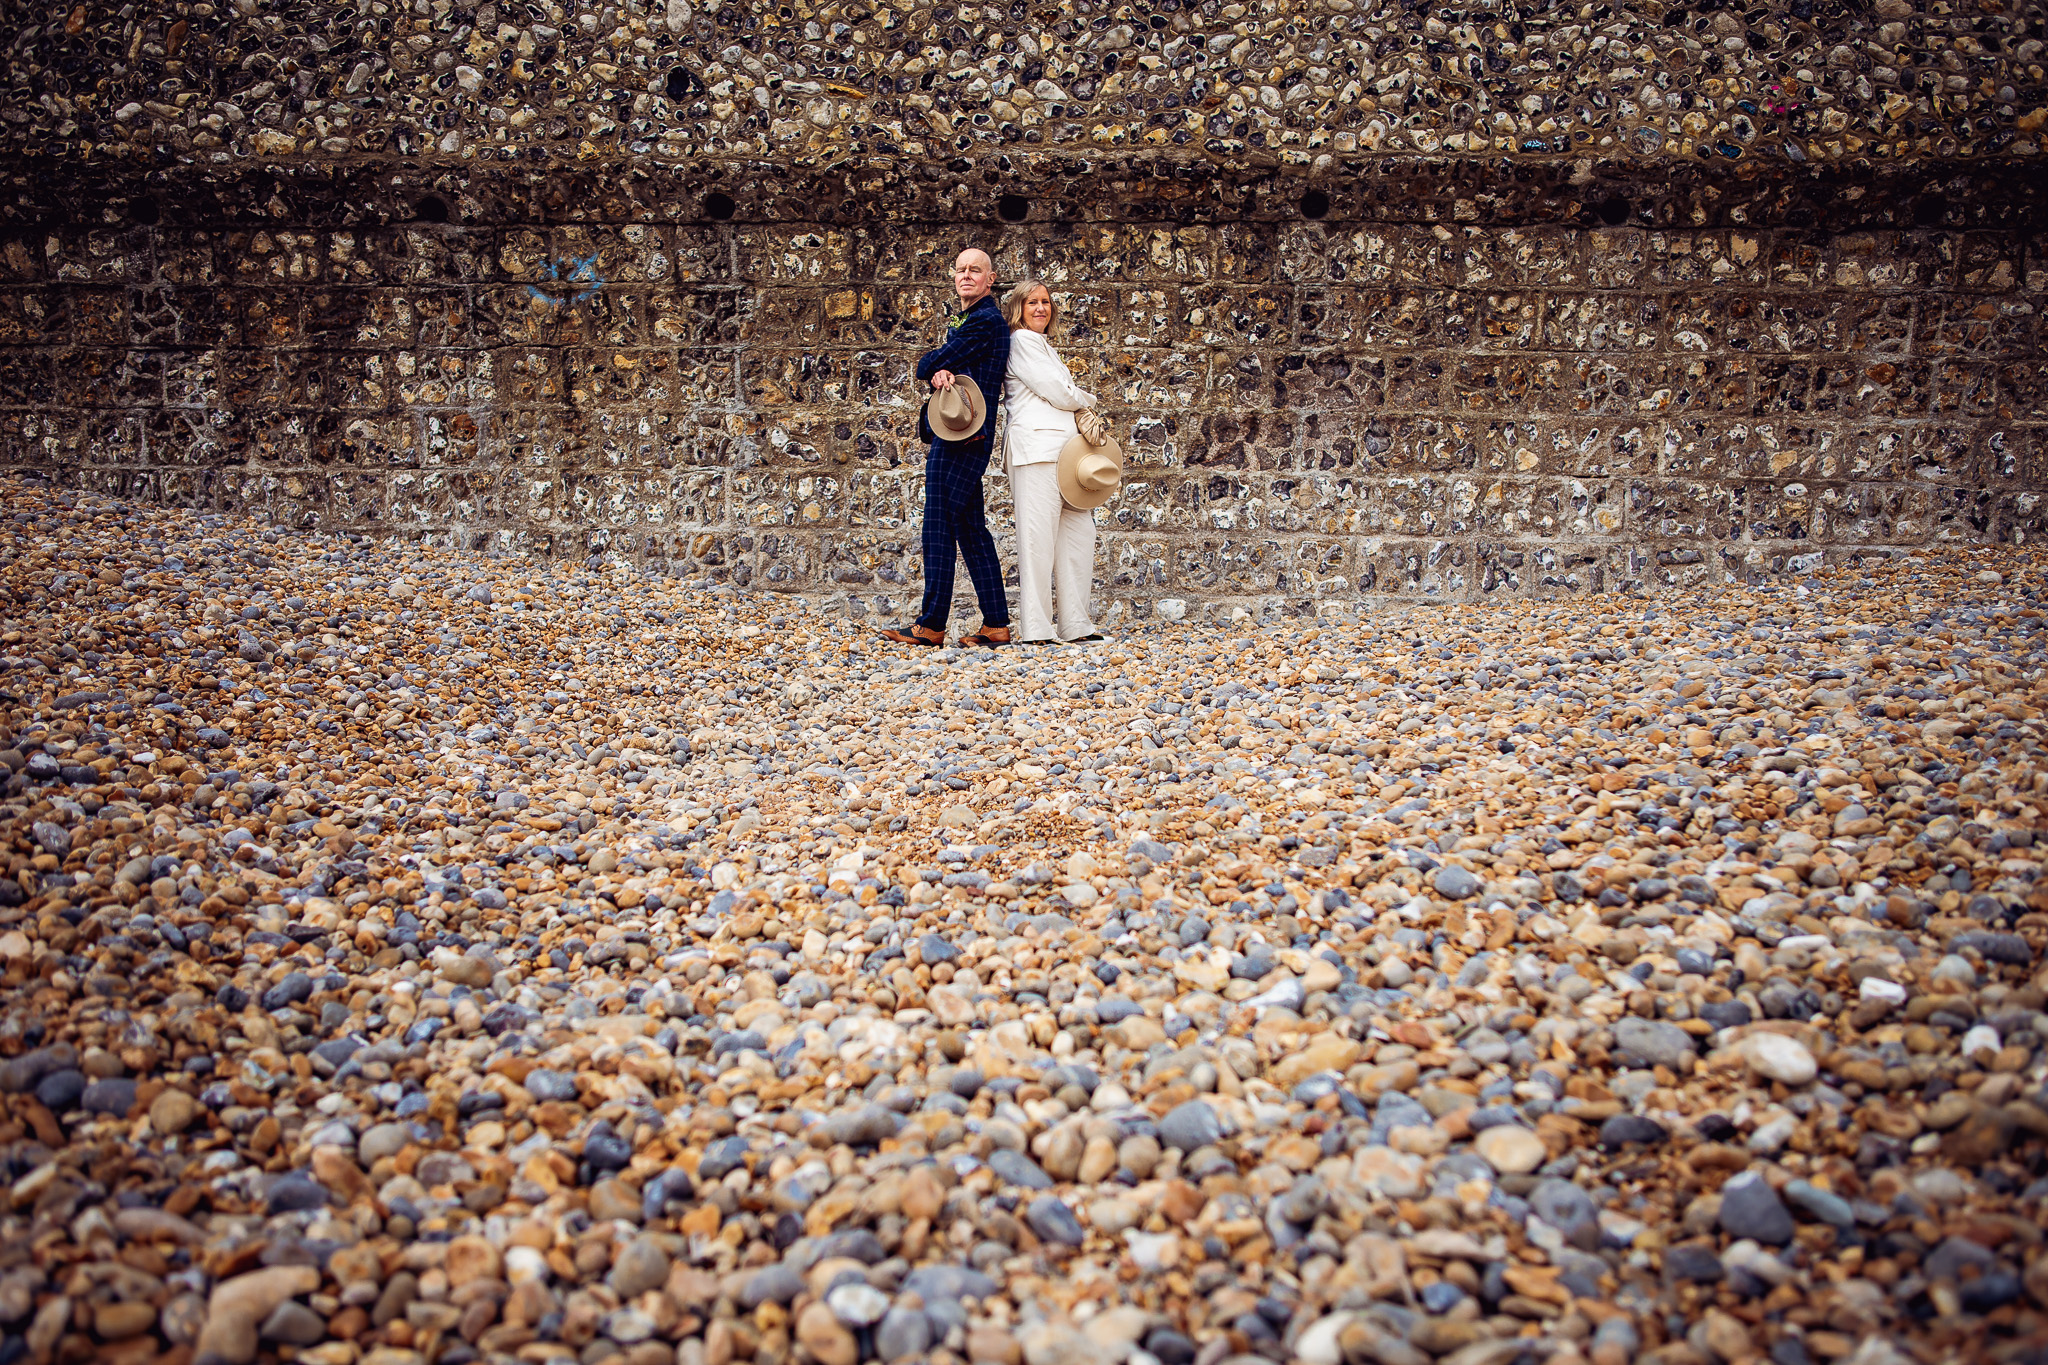 Mary and Mike pose back to back holding their fedoras during their couple portrait session on Brighton beach.